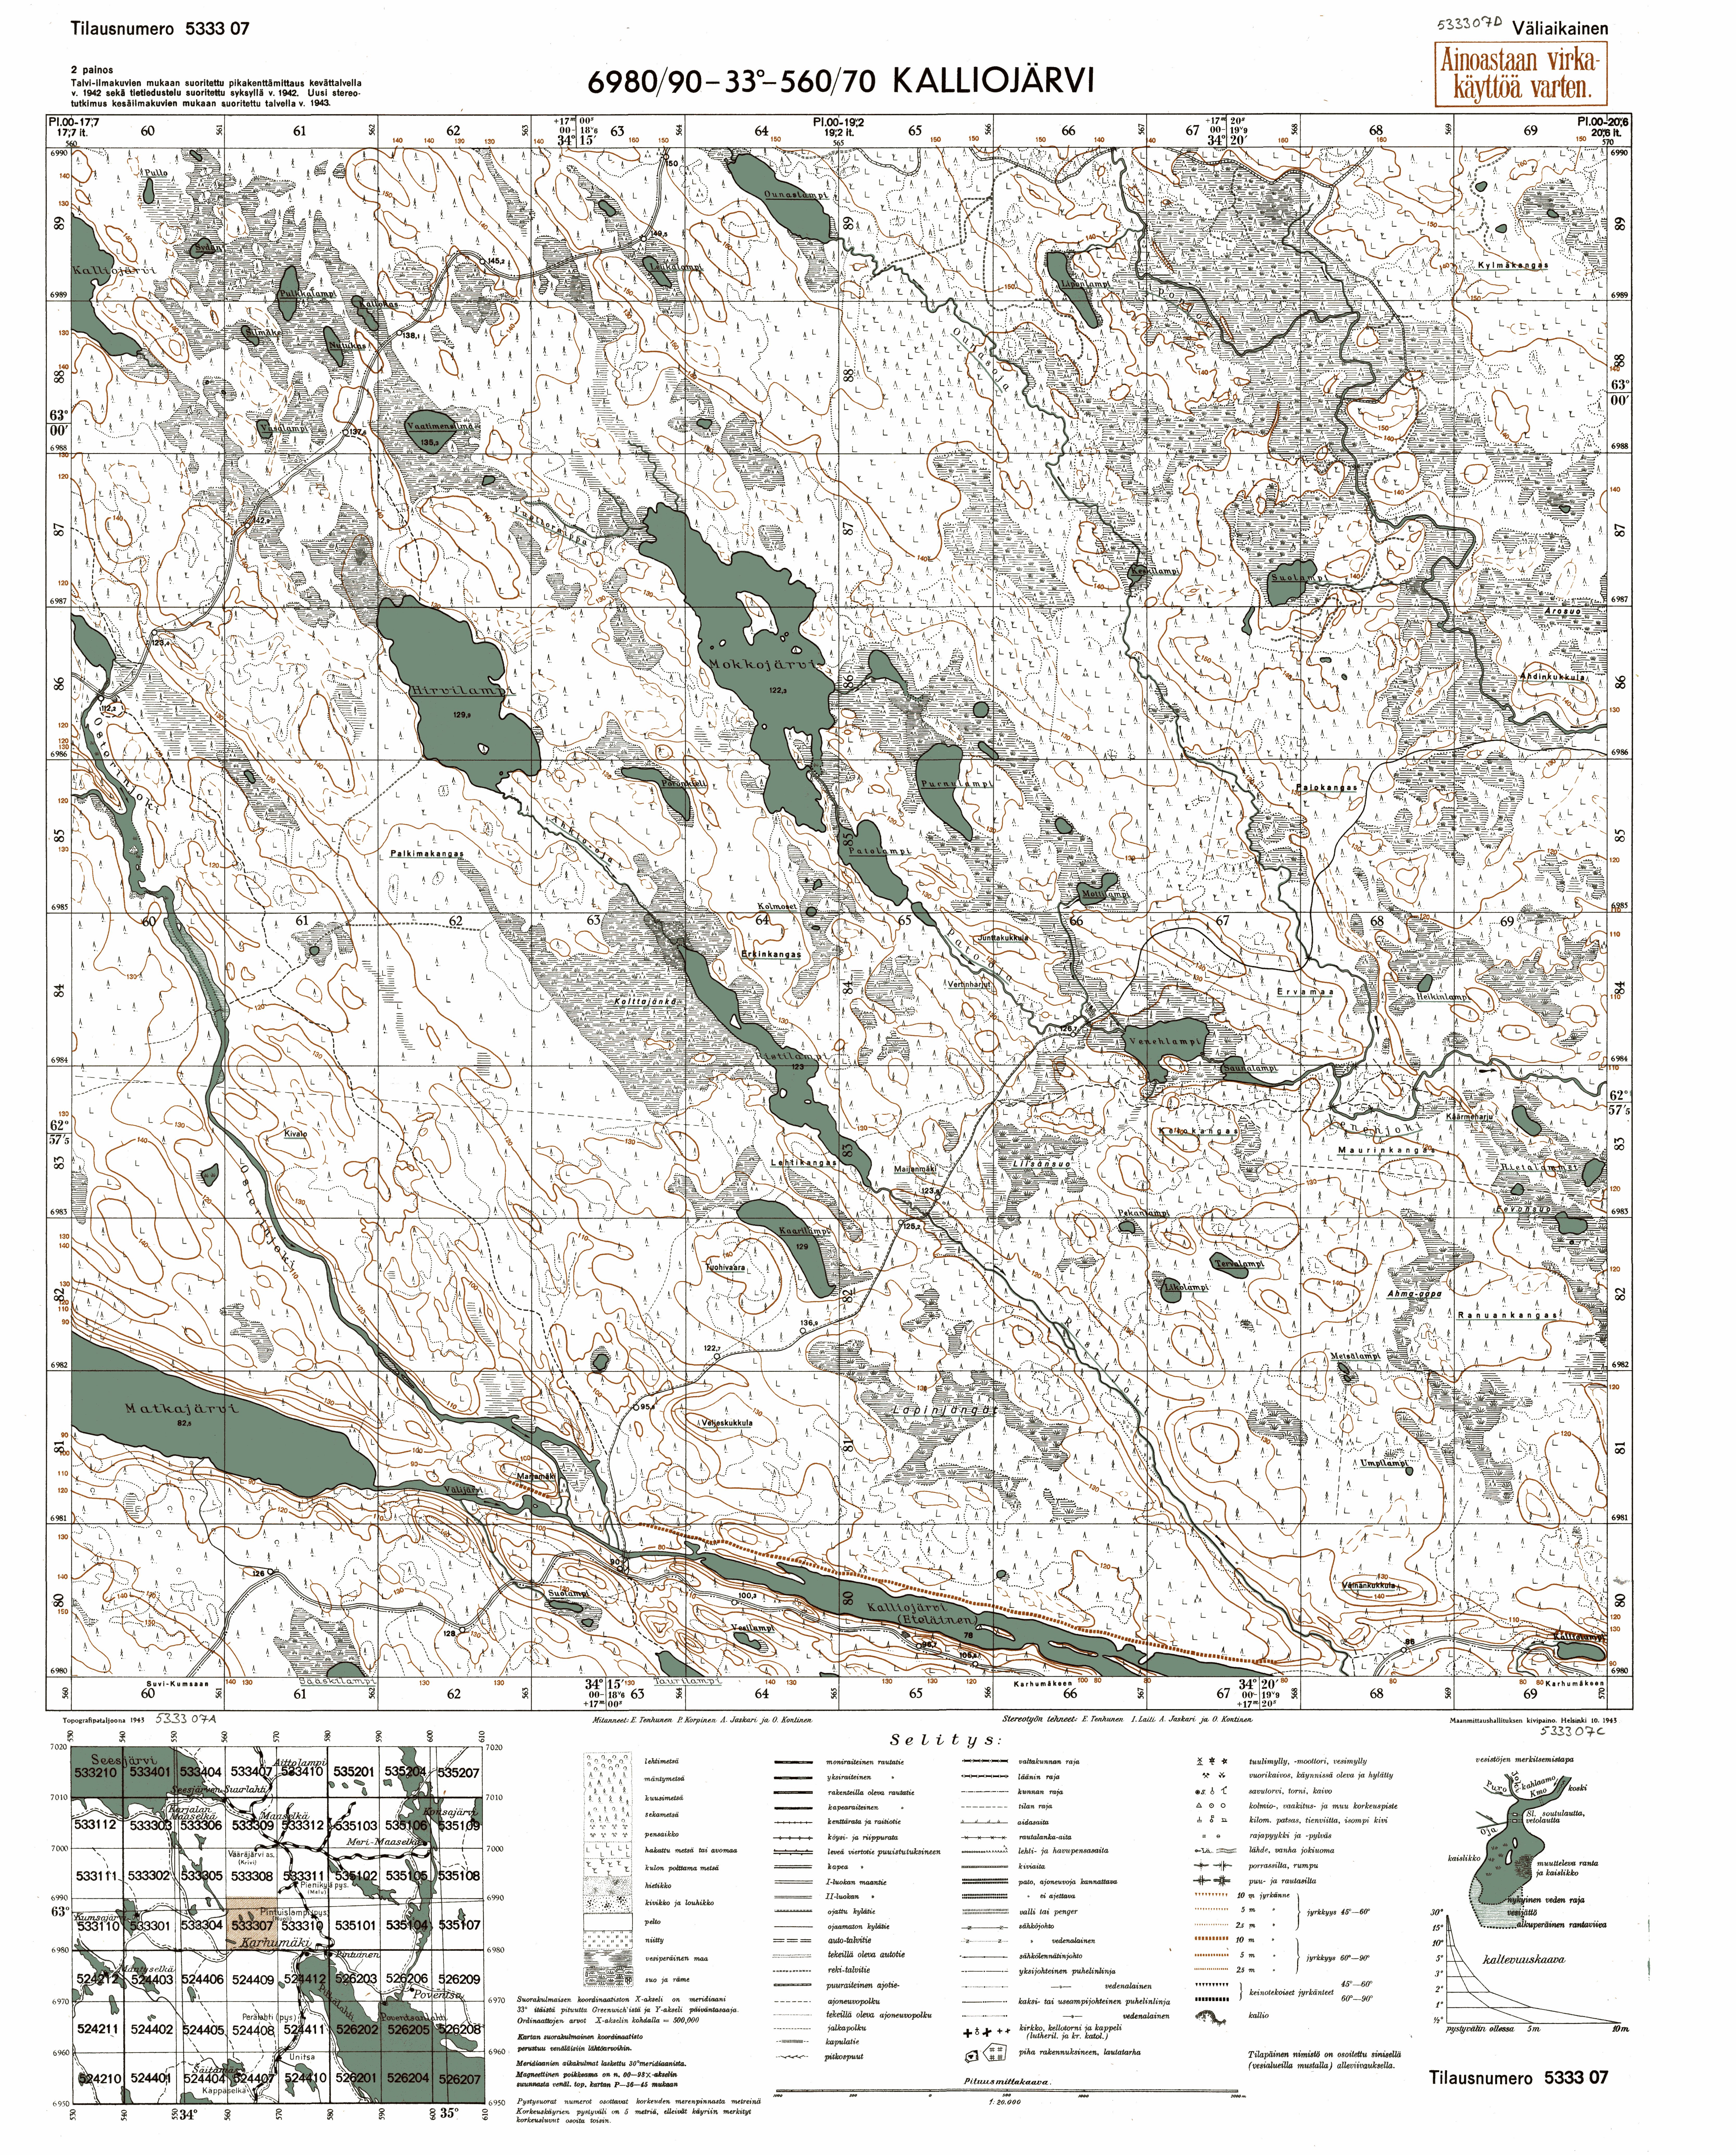 Kol'ozero Lake. Kalliojärvi. Topografikartta 533307. Topographic map from 1943. Use the zooming tool to explore in higher level of detail. Obtain as a quality print or high resolution image